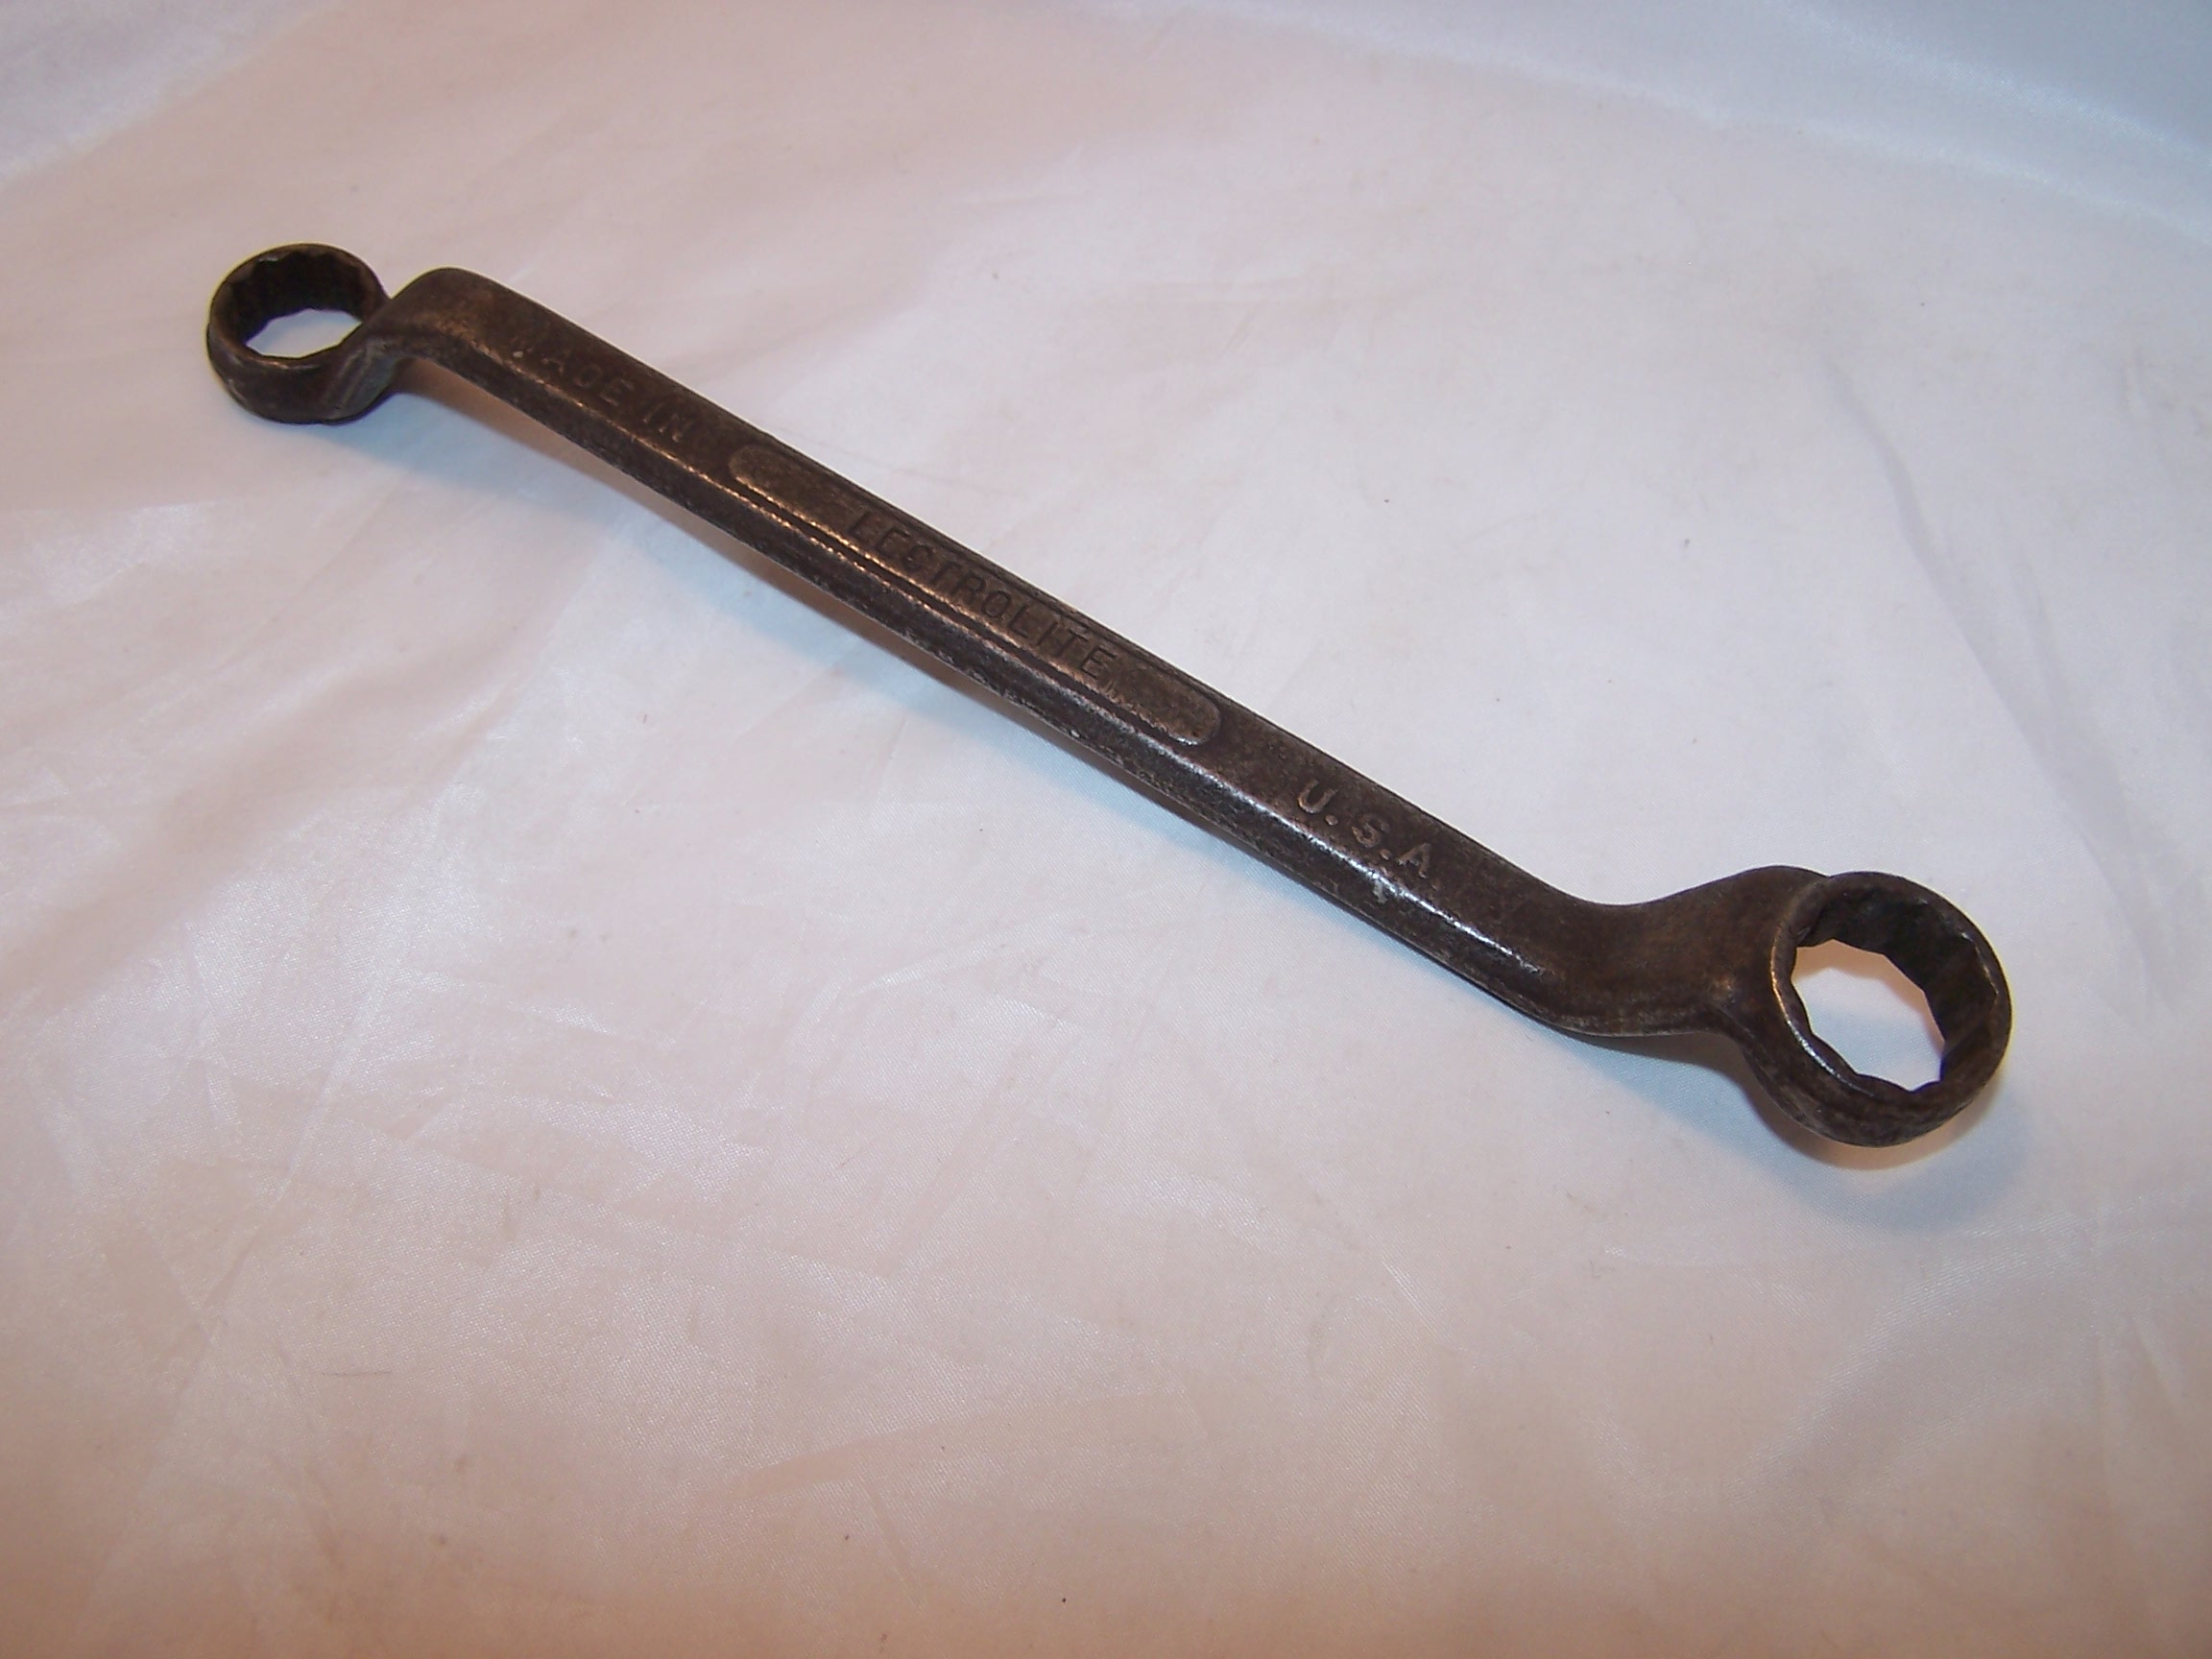 Lectrolite Offset Box End Wrench, Made in U.S.A.